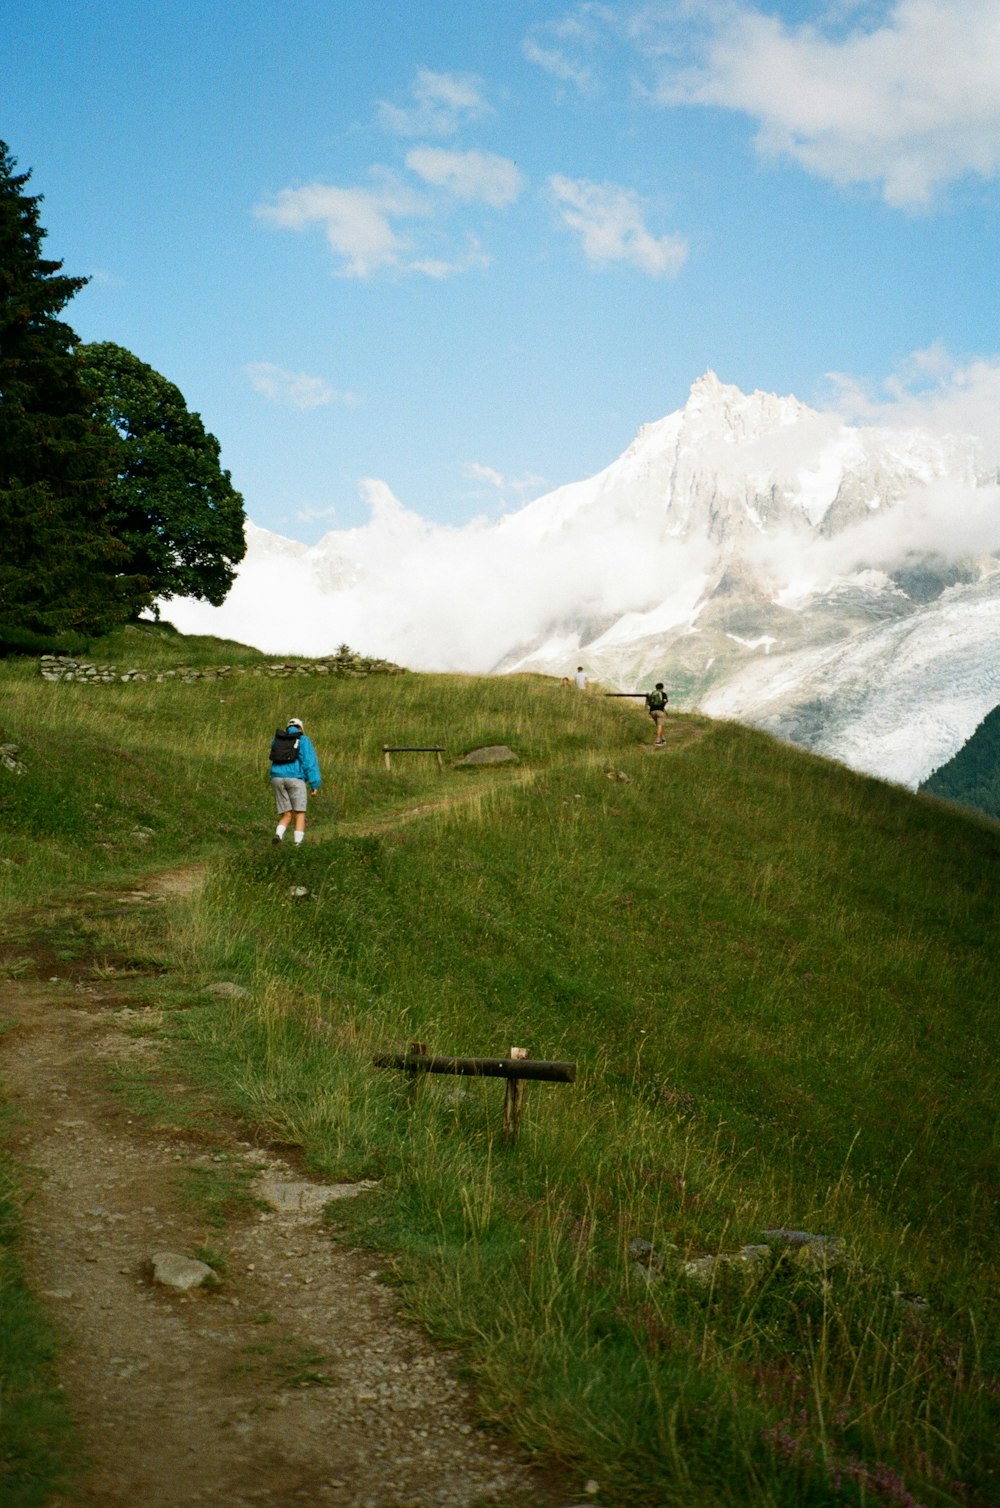 two people hiking up a grassy hill with a mountain in the background